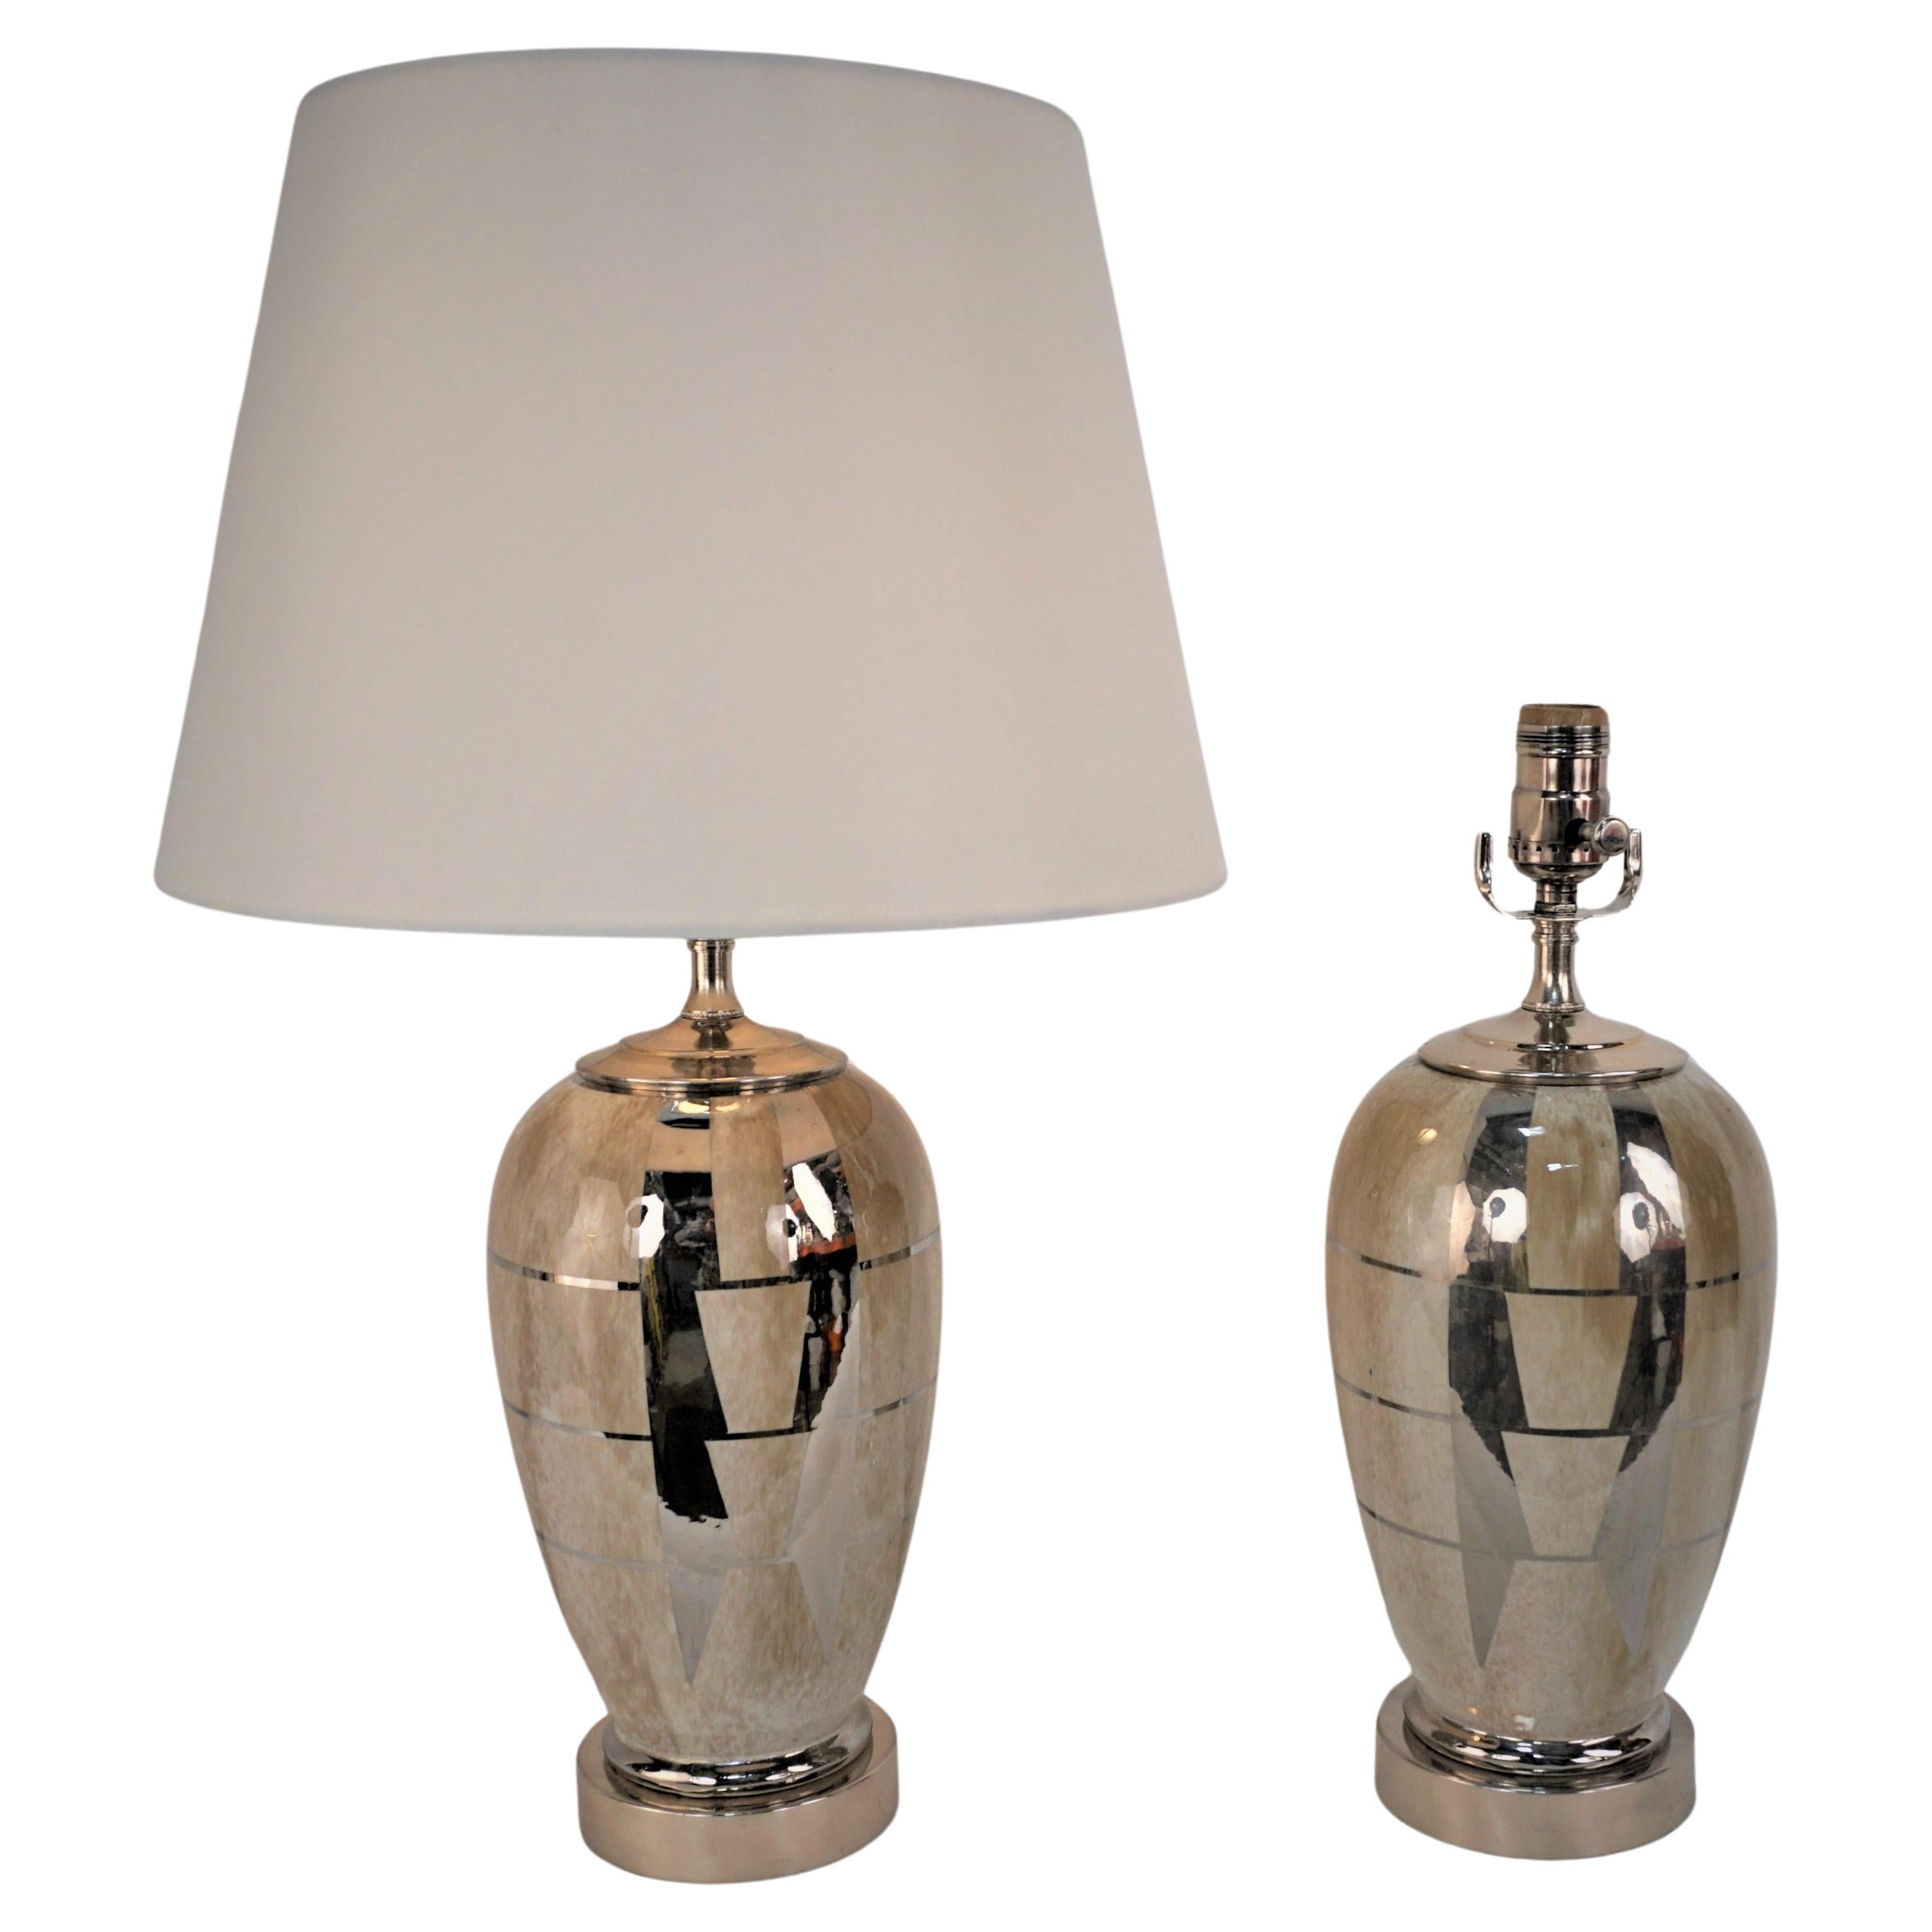 Pair of Art Deco Ceramic Silver and Beige Color Table Lamps For Sale